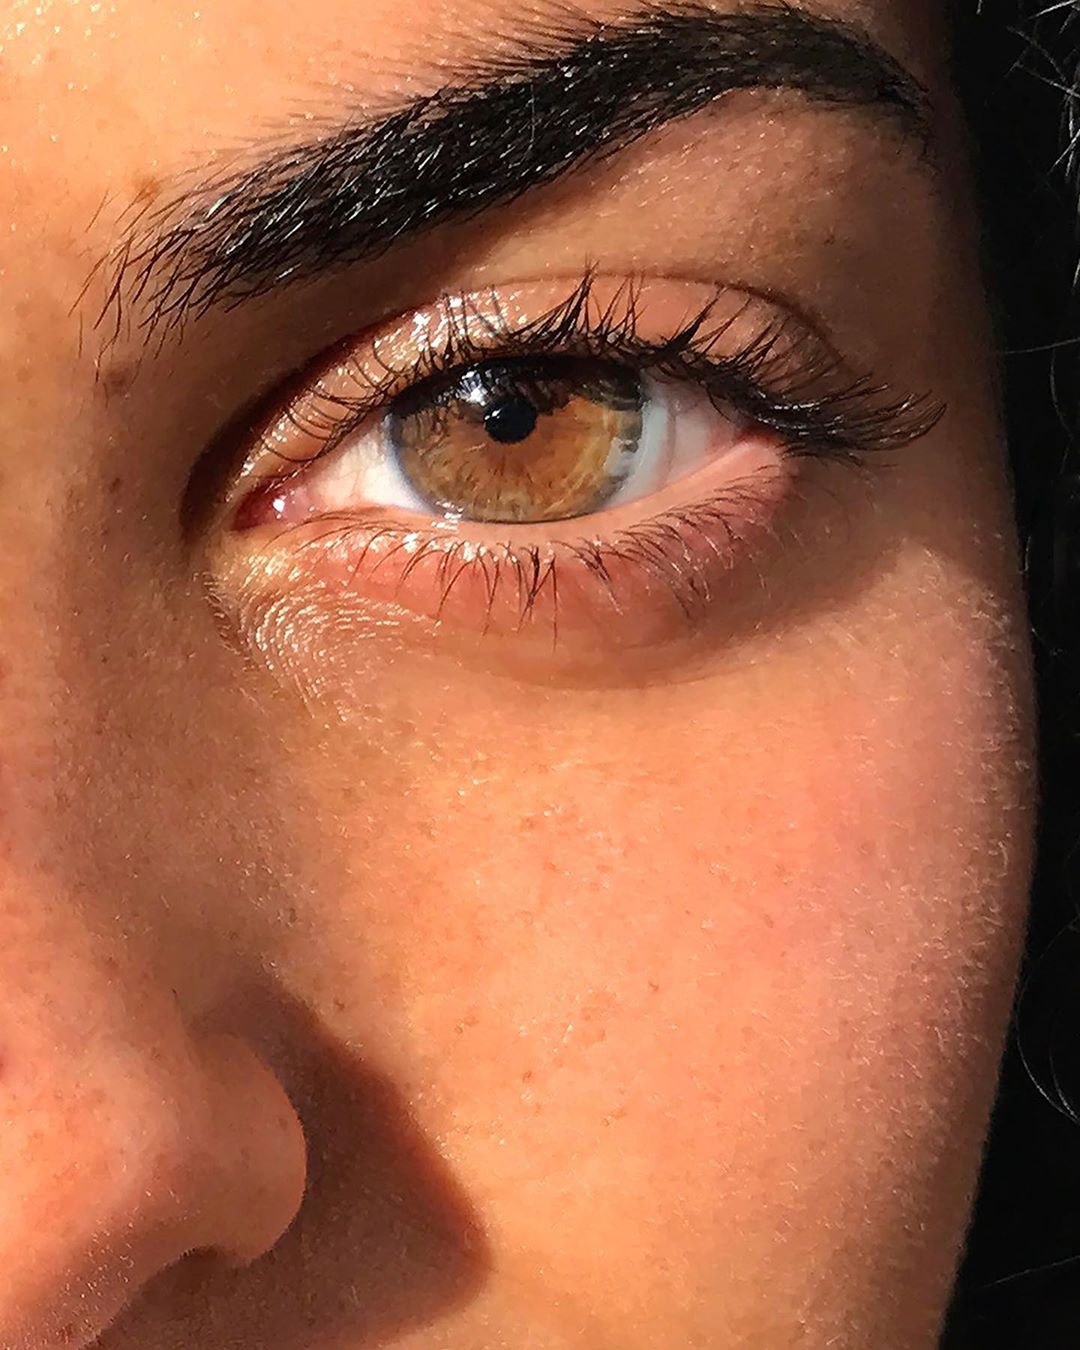 Clinique - Have sensitive eyes? Good news: Every single Clinique mascara is Ophthalmologist-tested. They’re also 👍👍for contact lens wearers too. Tap once to shop!
Clinique #beauty #makeup #parabenfree...